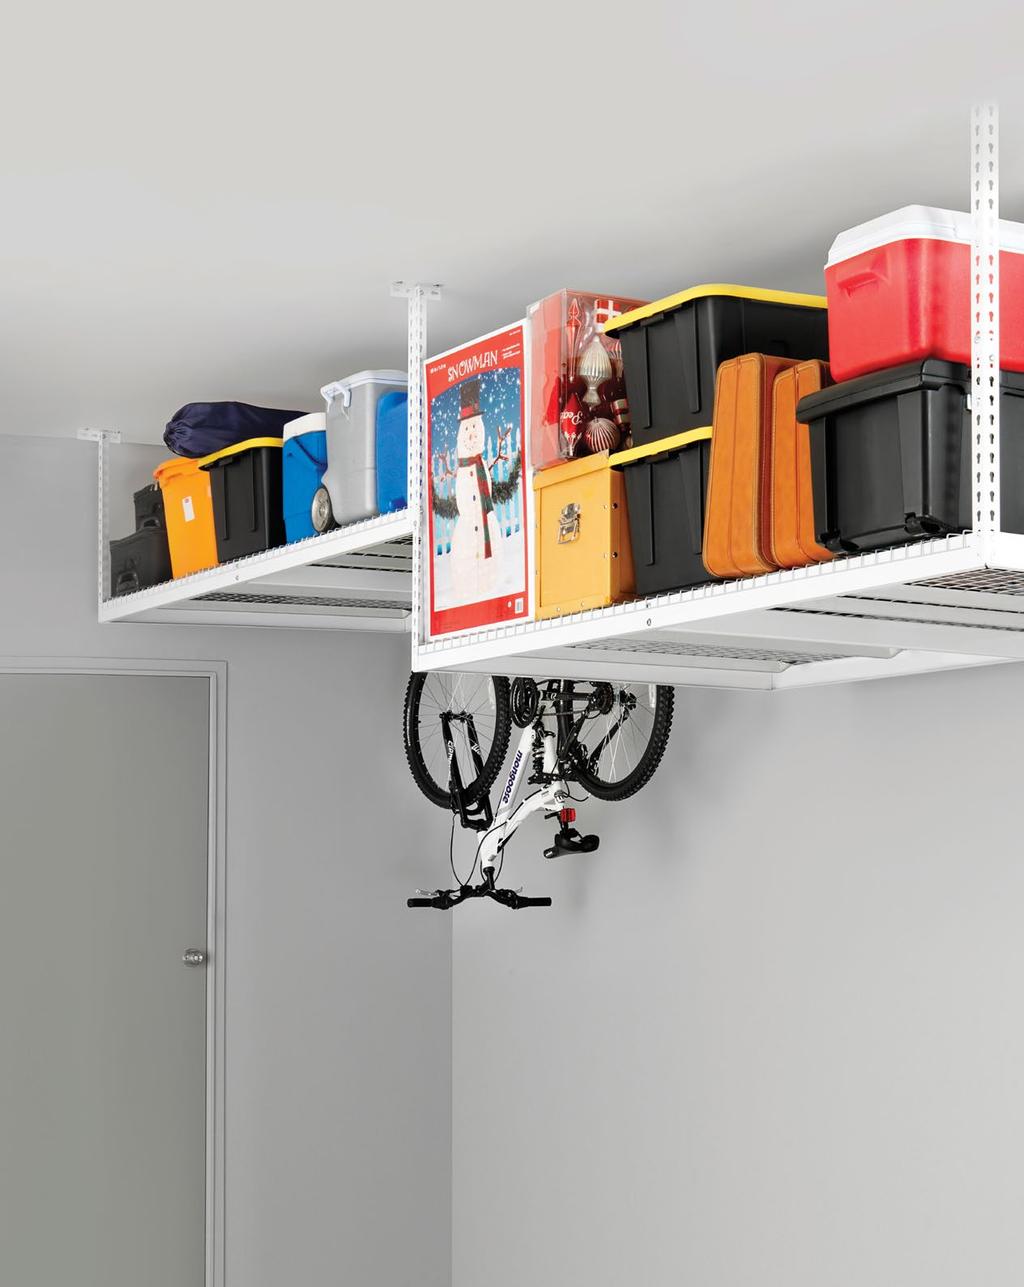 overhead storage Ceiling Racks. Space-efficient storage. Frequently asked questions Overhead storage How much weight does a 4 x 8 overhead hold? The 4 x 8 overhead ceiling rack can hold up to 600 Lbs.